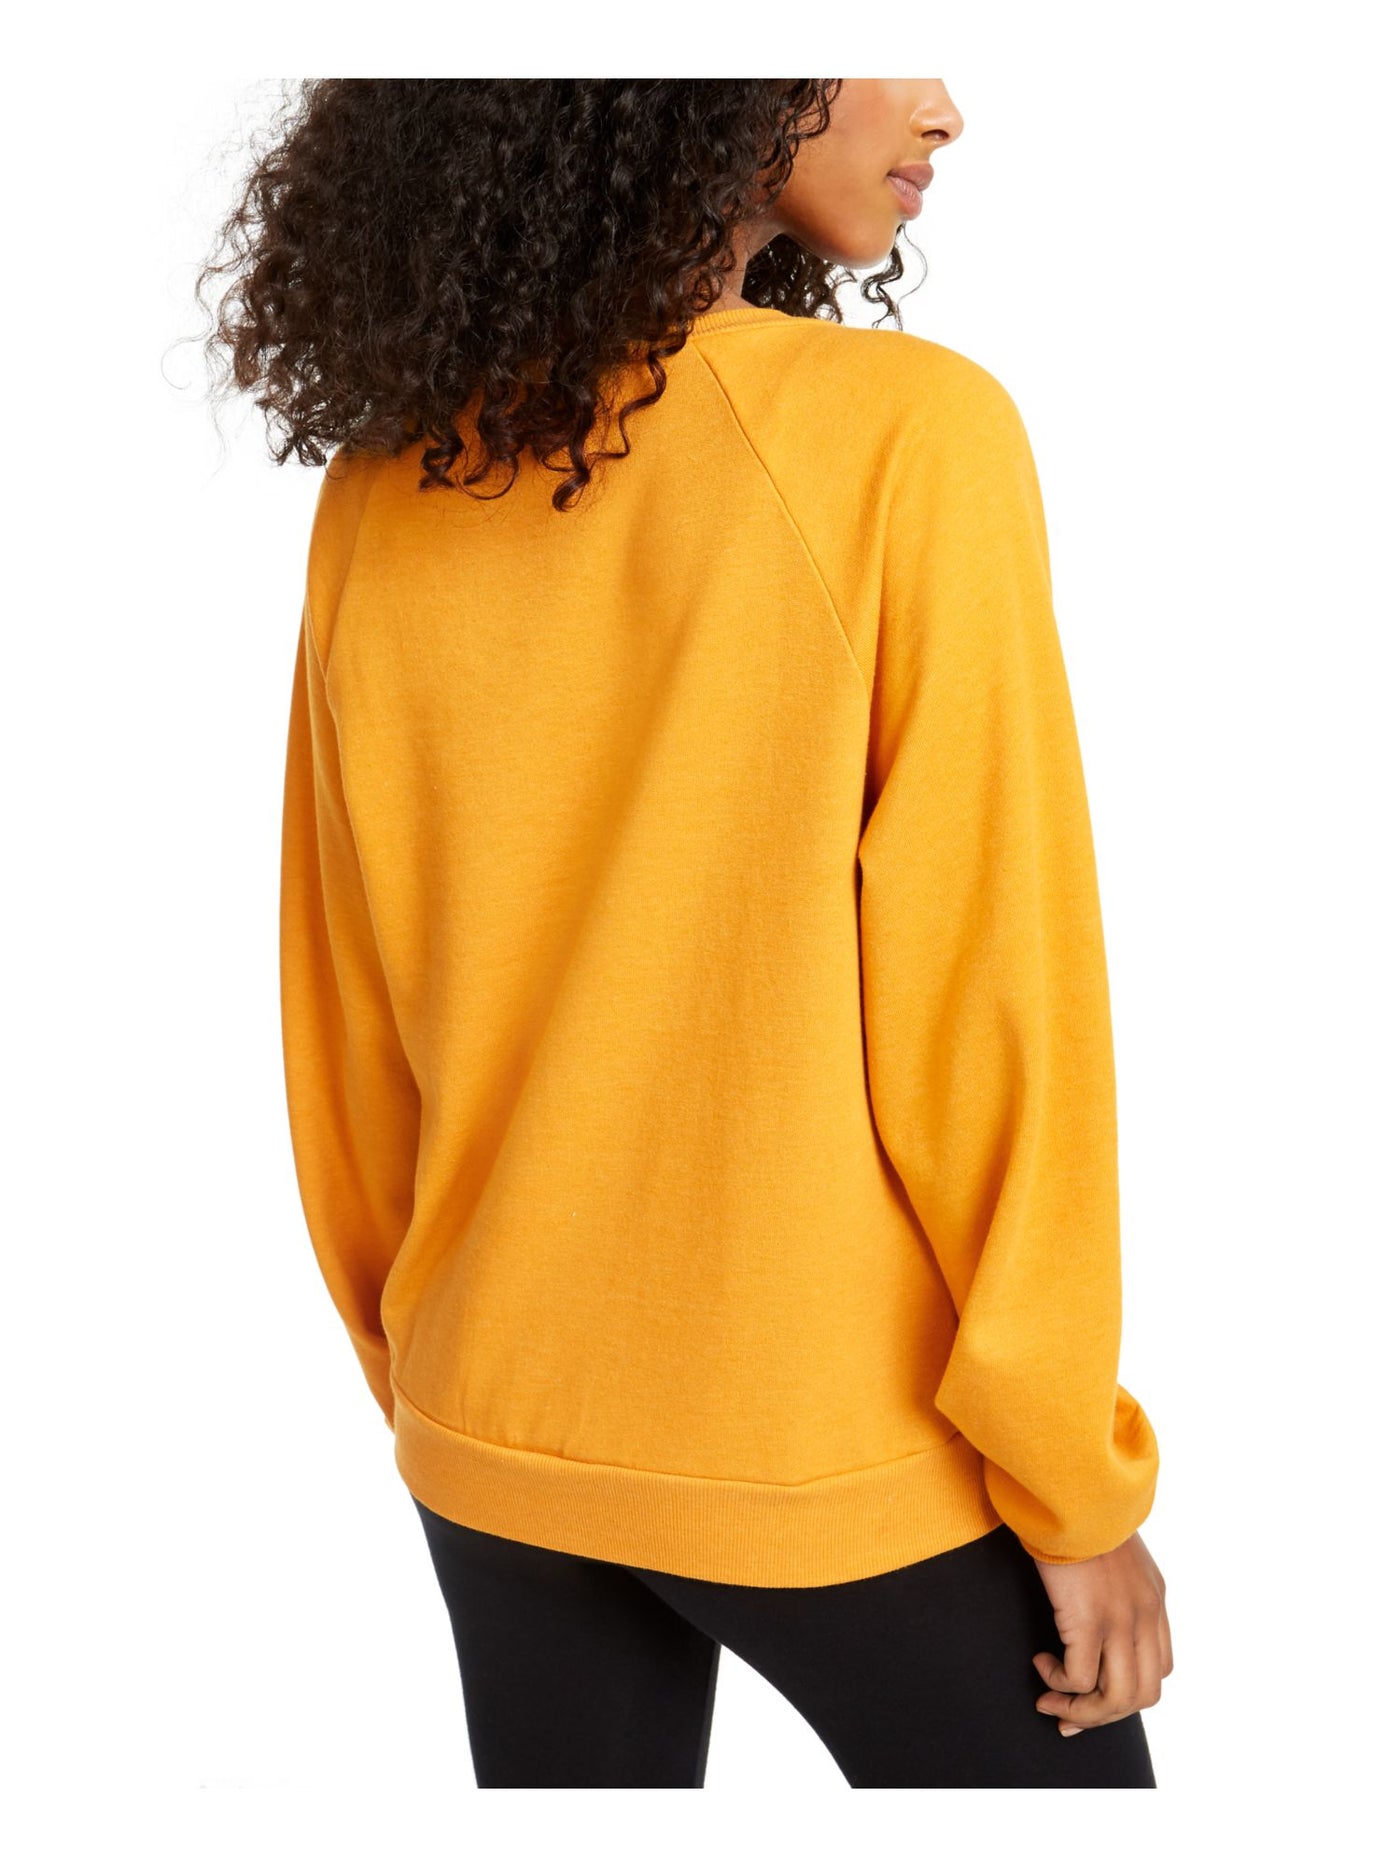 REBELLIOUS ONE Womens Gold Printed Long Sleeve Crew Neck Top XS